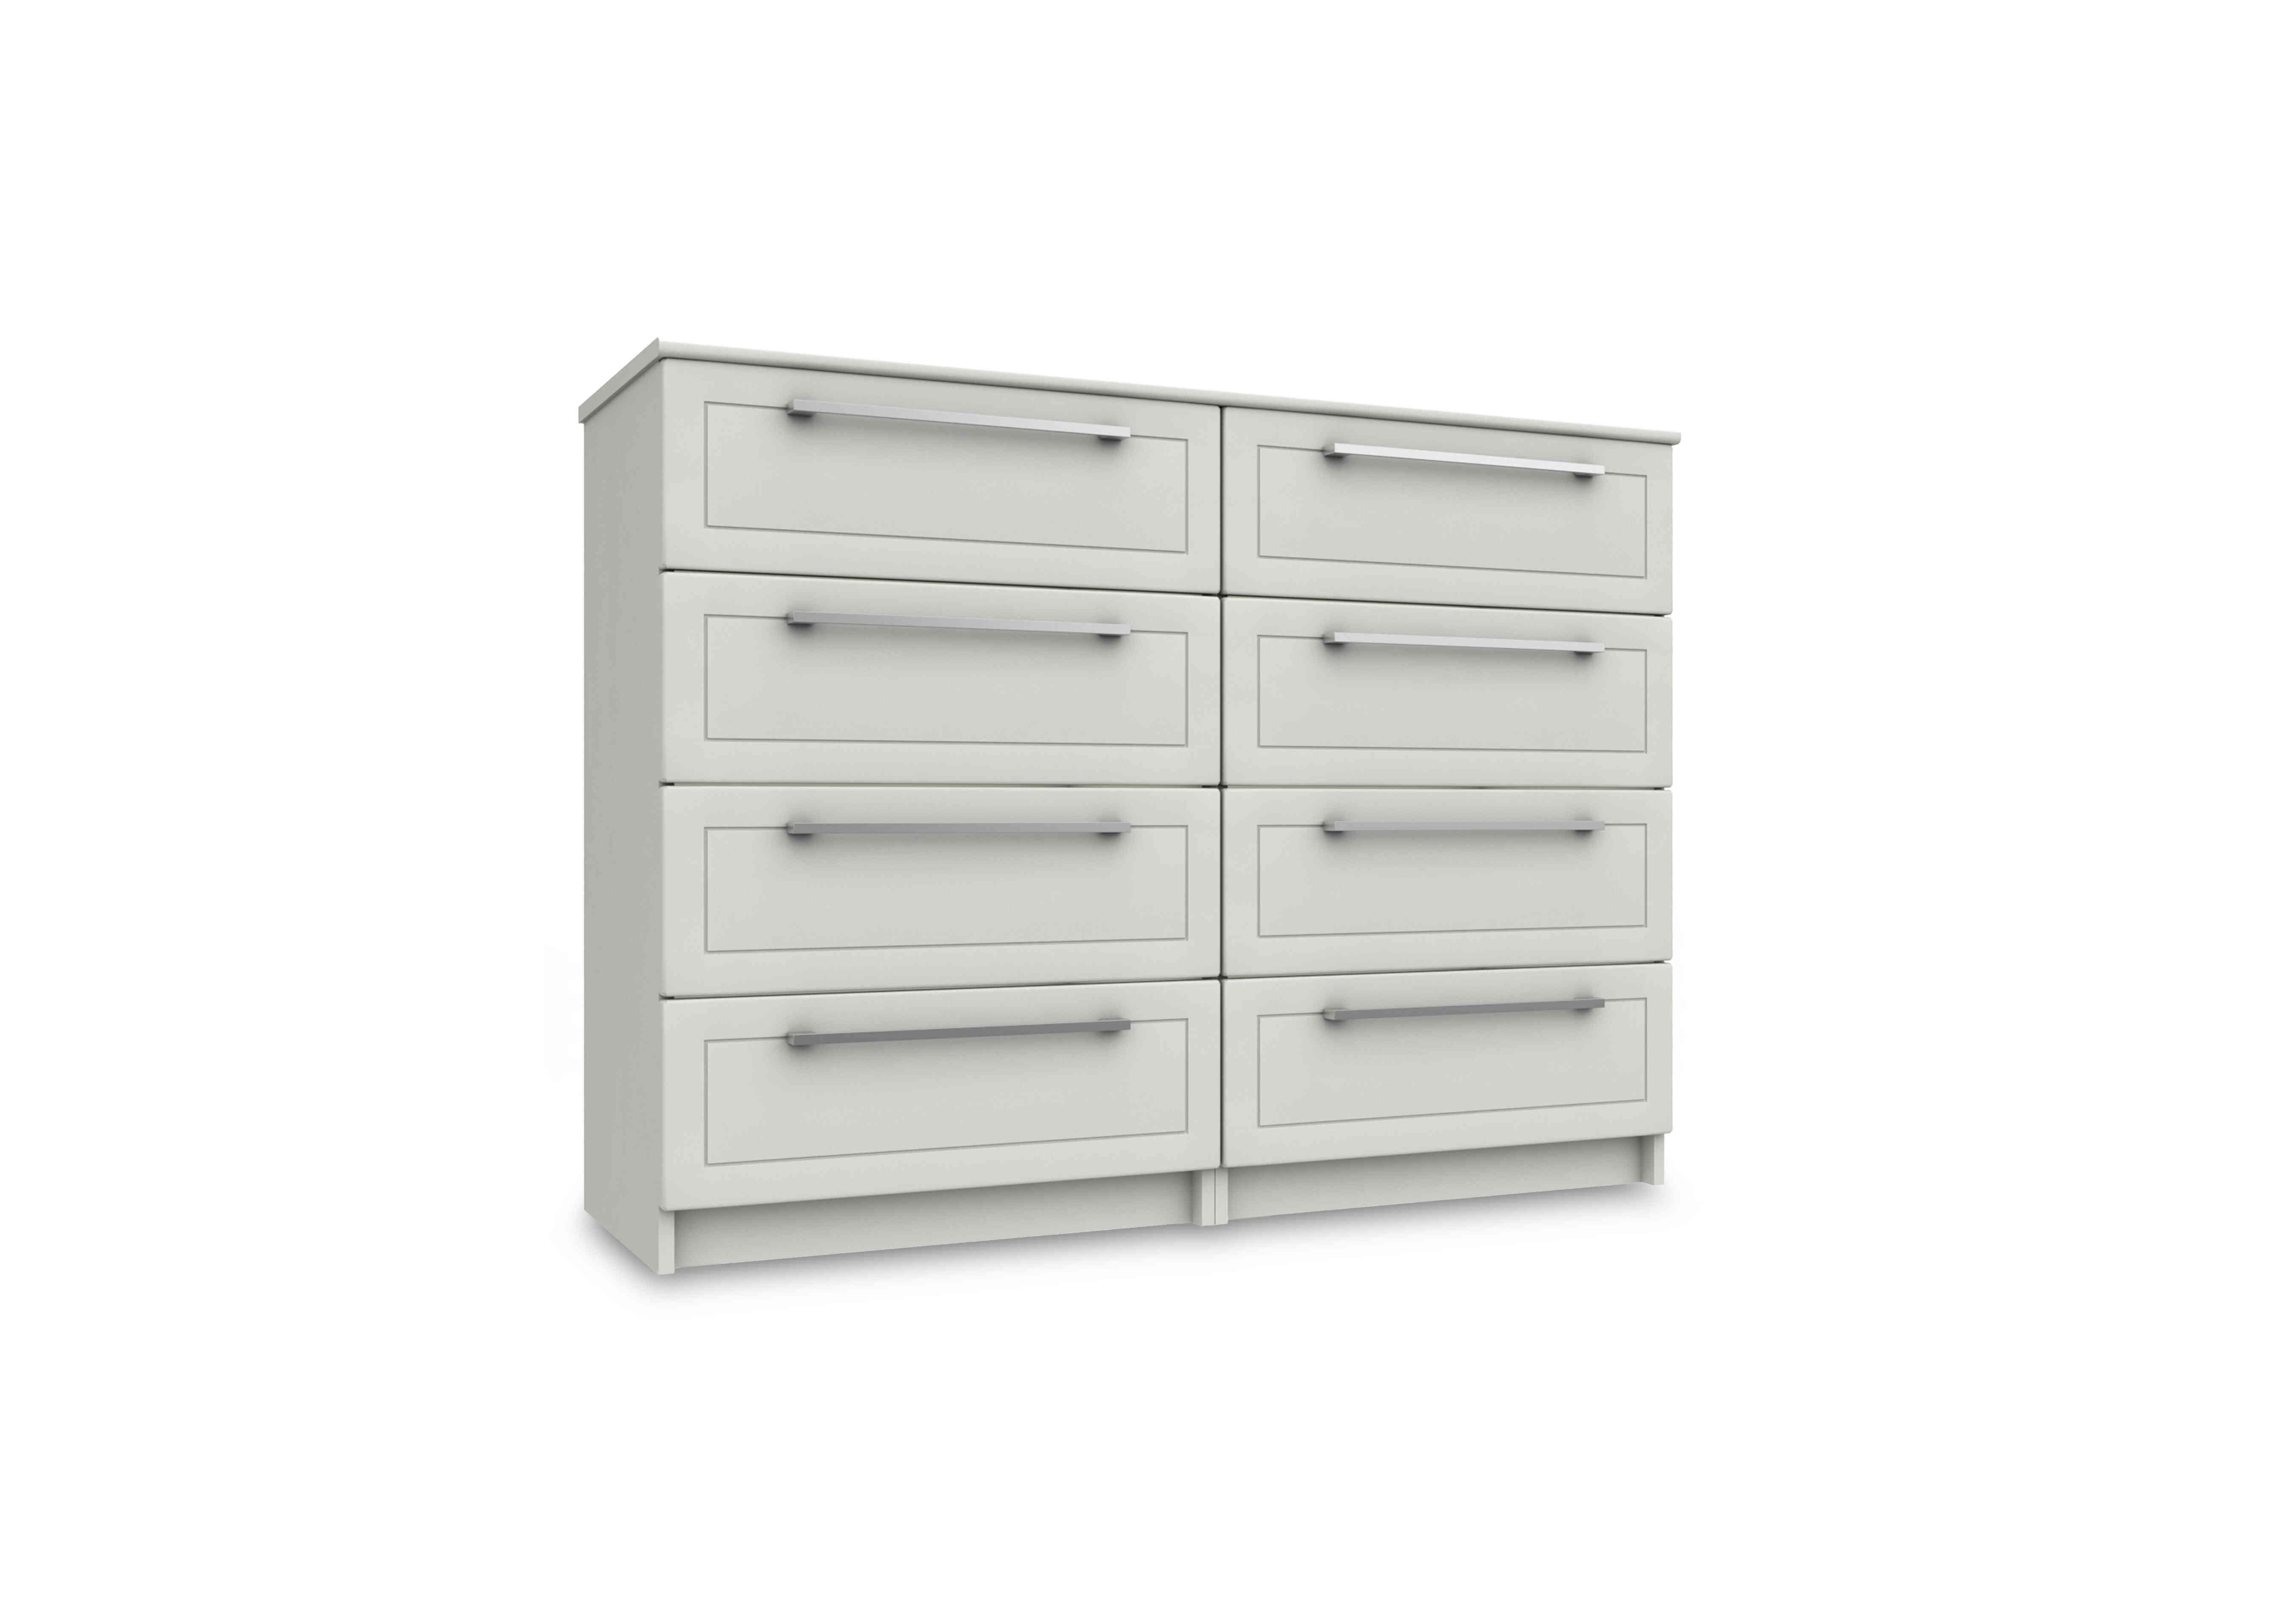 Bexley 8 Drawer Chest in White Gloss on Furniture Village